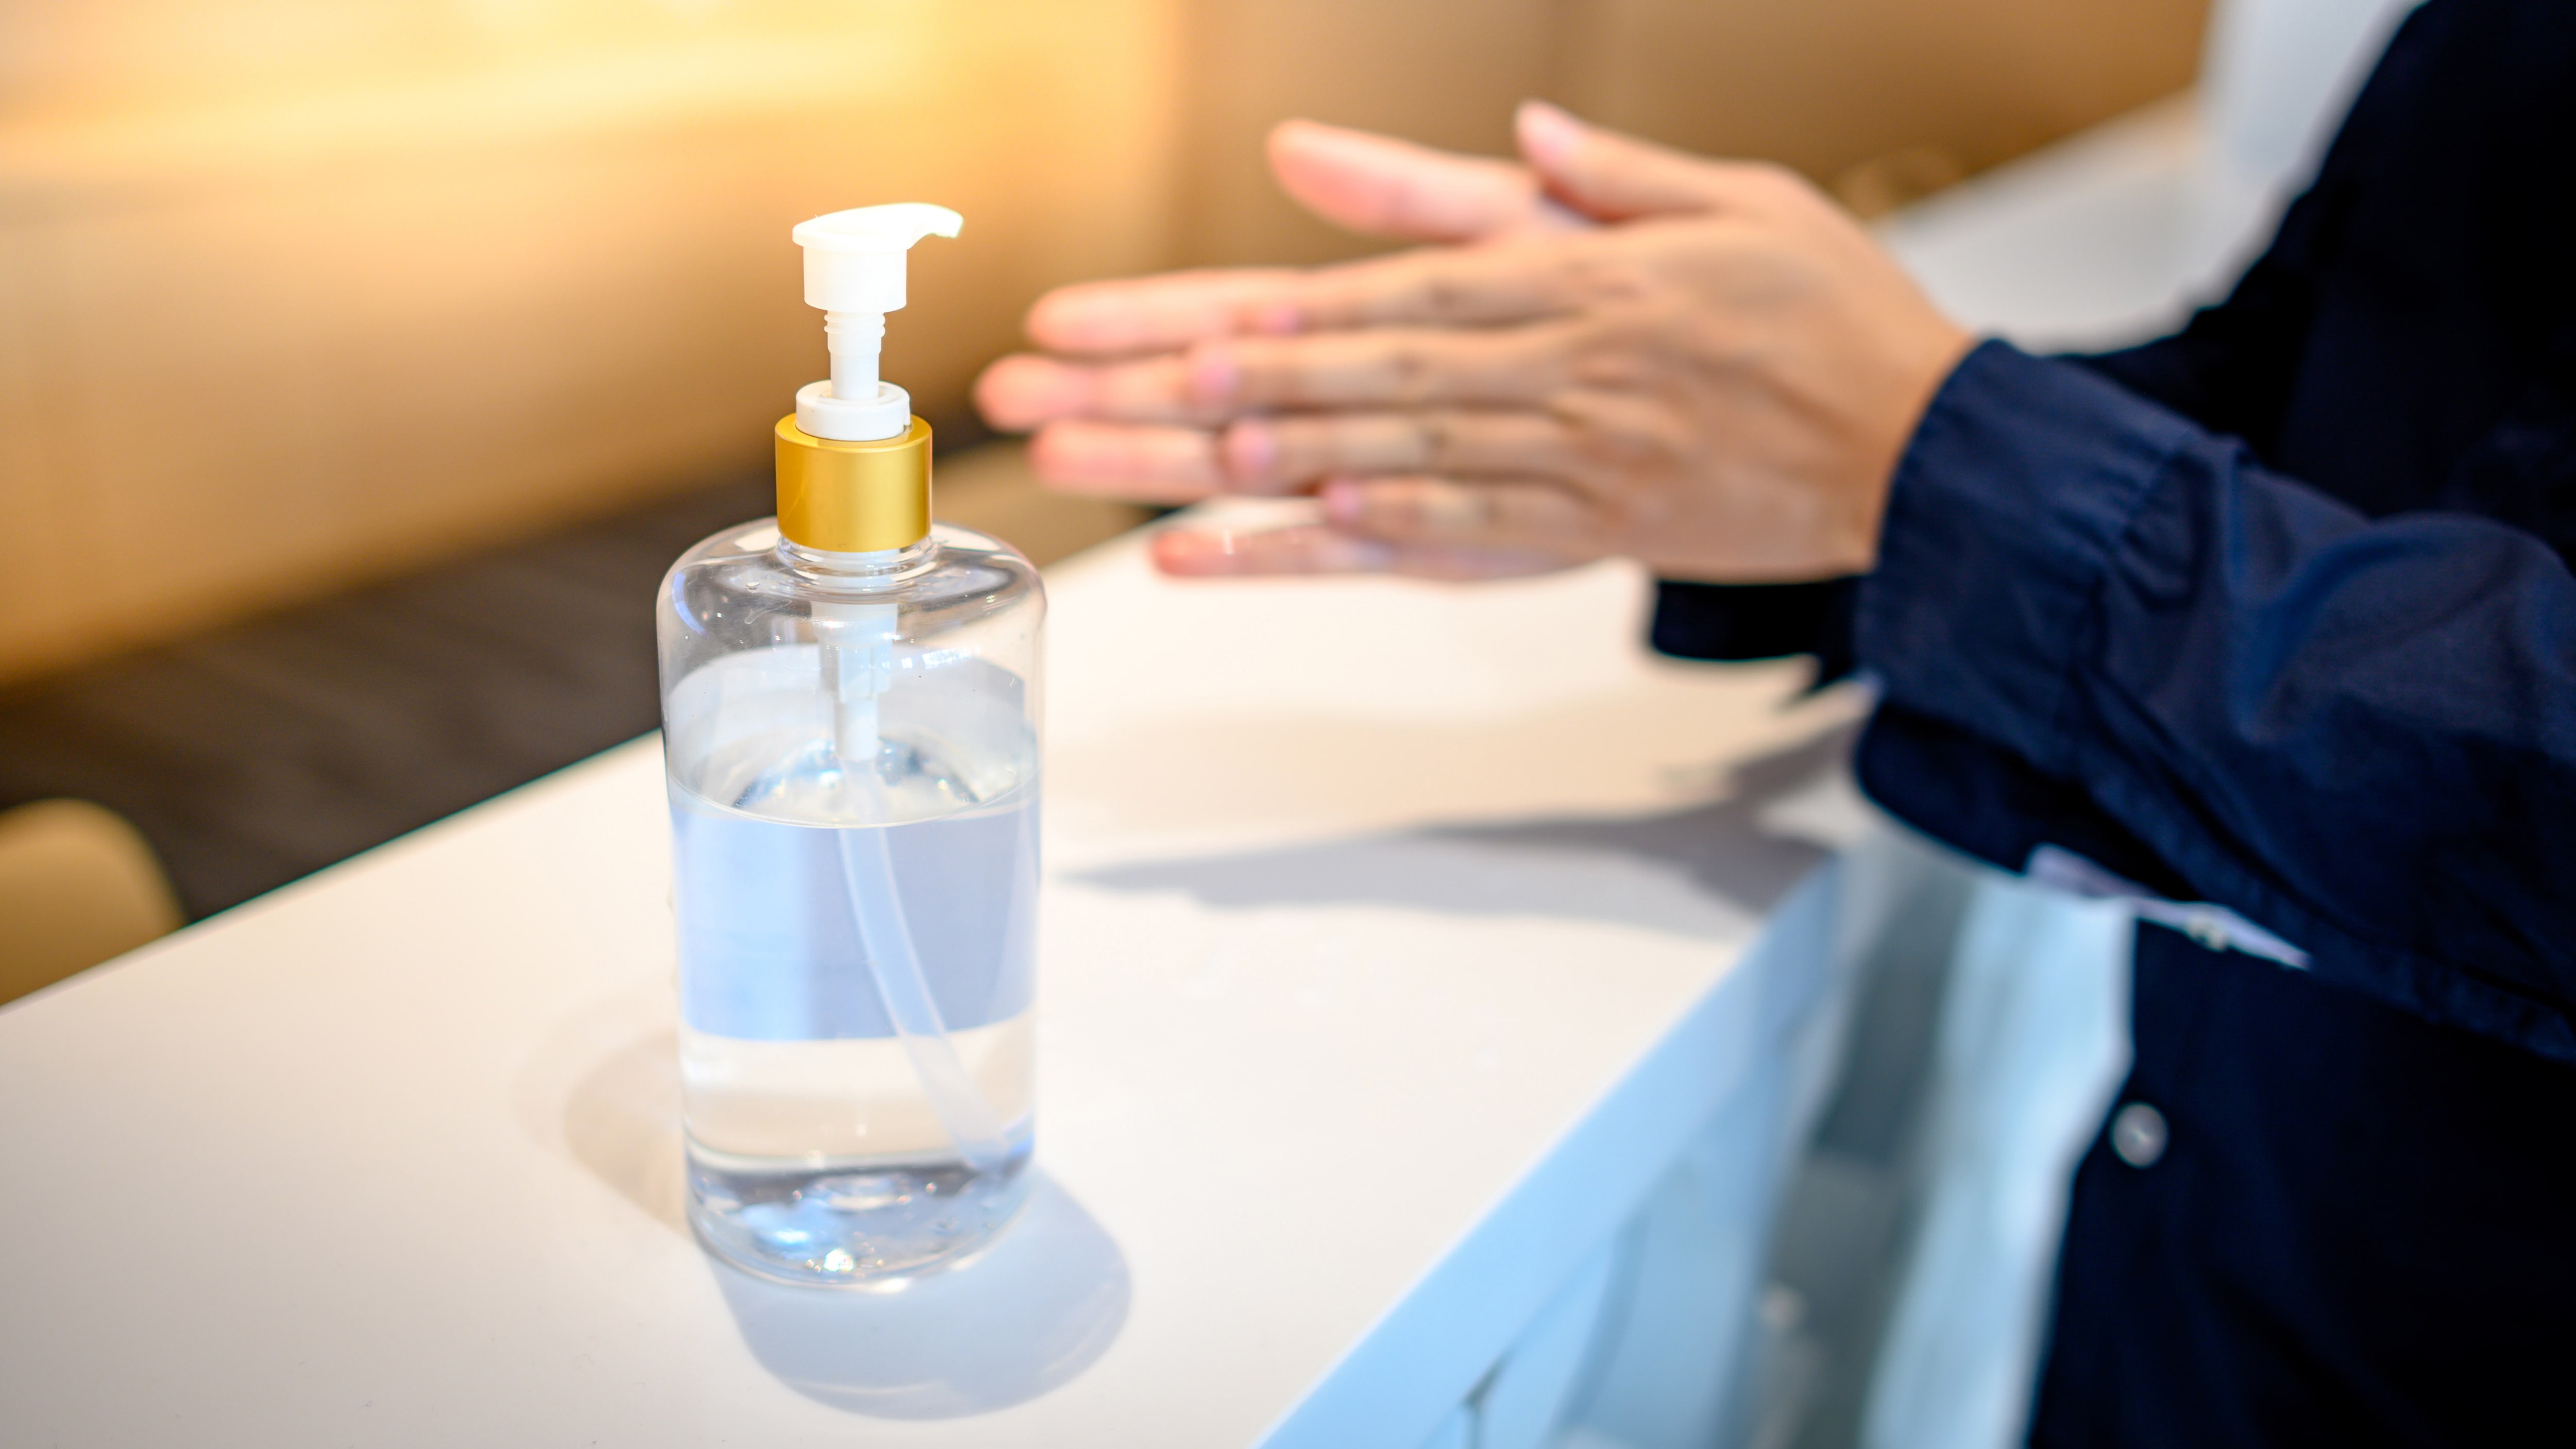 Person using hand sanitizer at reception desk.